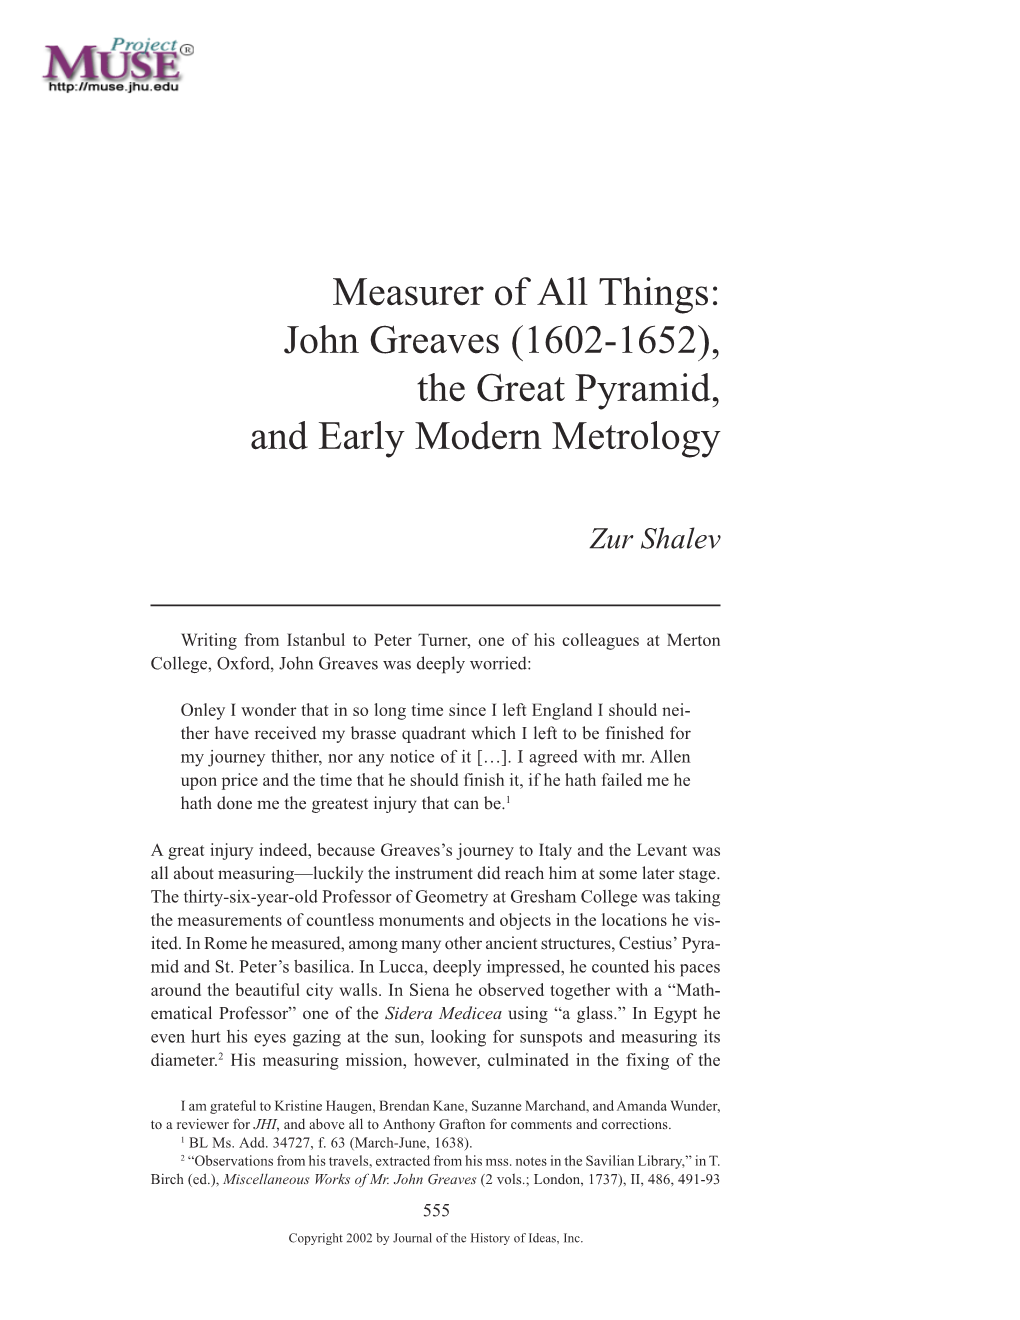 Measurer of All Things: John Greaves (1602-1652), the Great Pyramid, and Early Modern Metrology